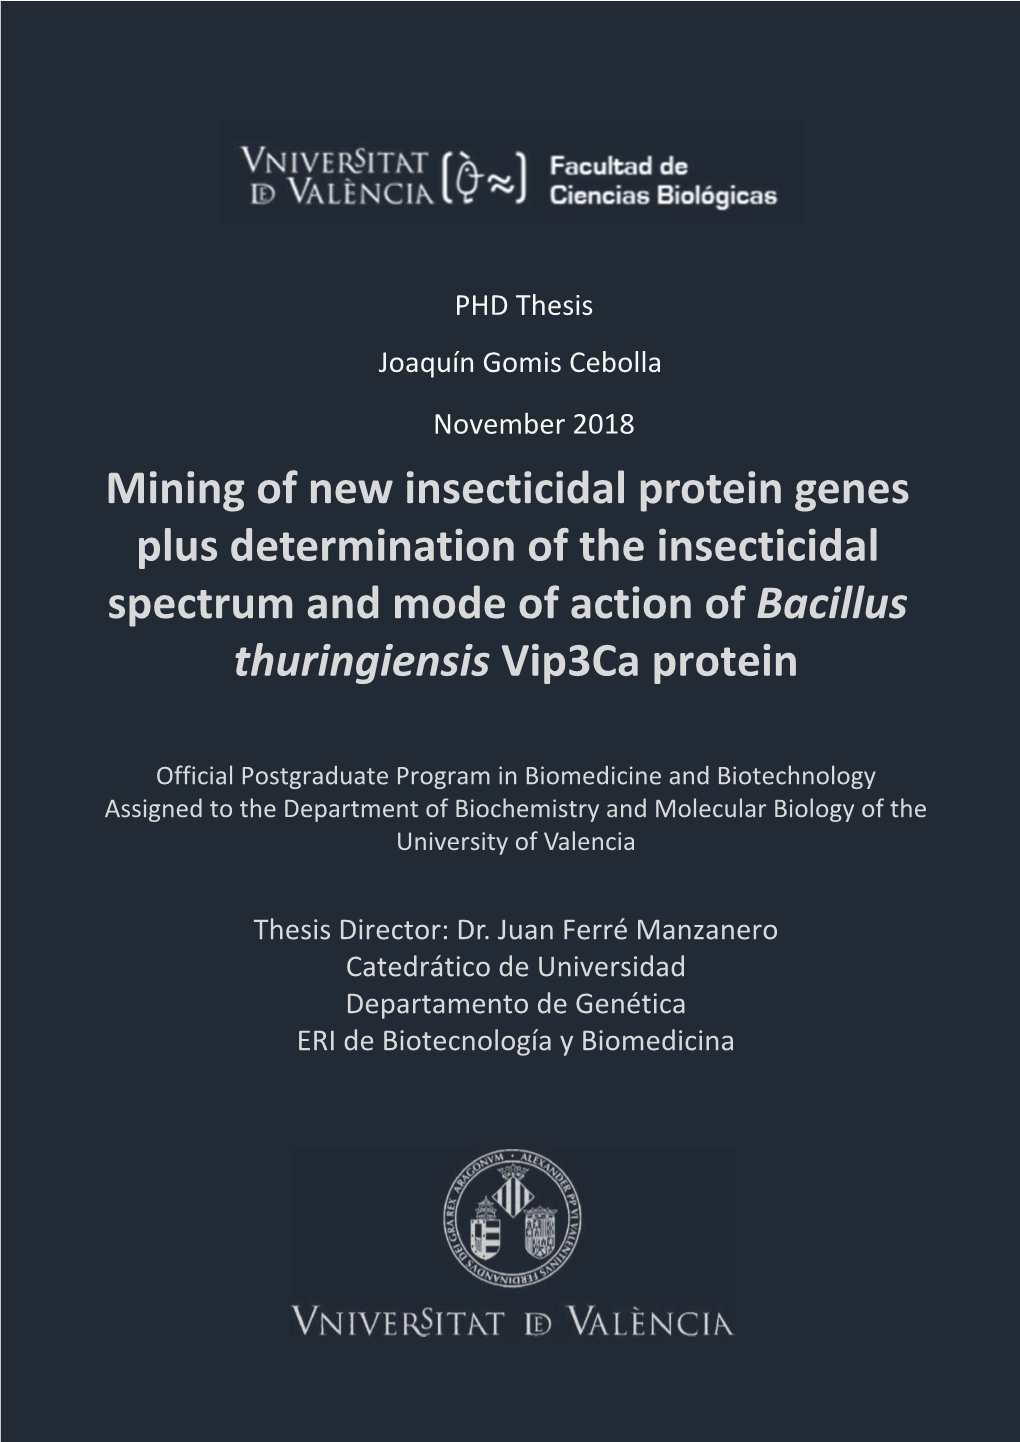 Mining of New Insecticidal Protein Genes Plus Determination of the Insecticidal Spectrum and Mode of Action of Bacillus Thuringiensis Vip3ca Protein